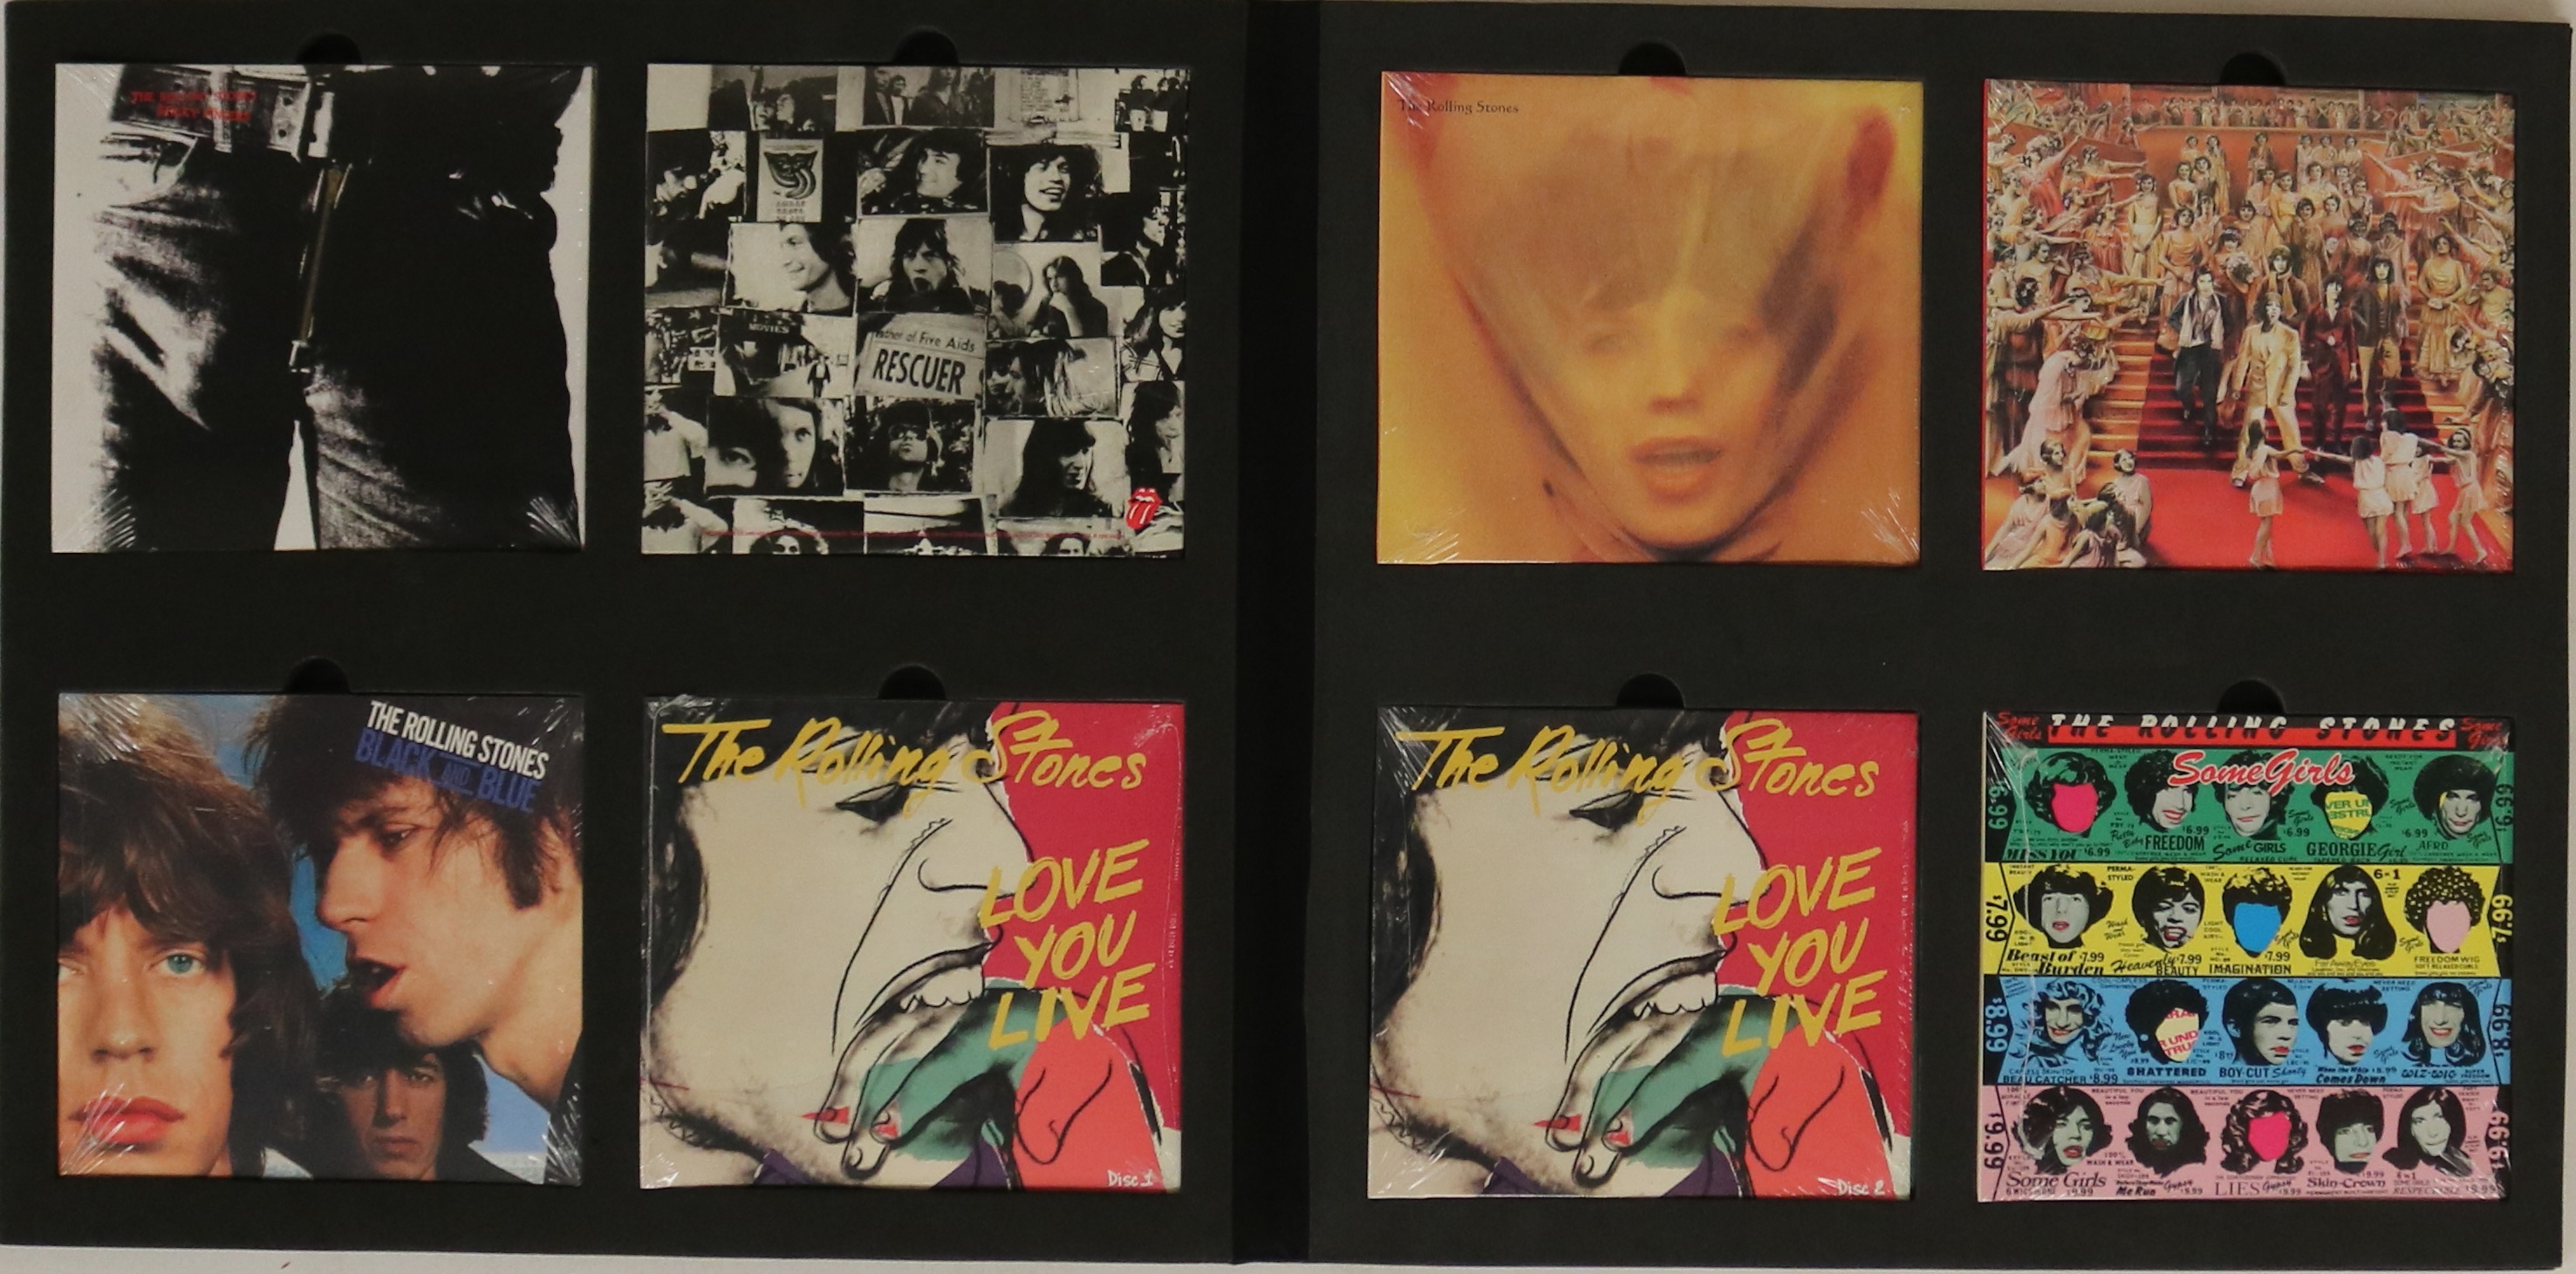 THE ROLLING STONES - YOU GET WHAT YOU NEED (THE SEVENTIES COMPLETE REMASTERED) - CD BOX SET. - Image 5 of 5